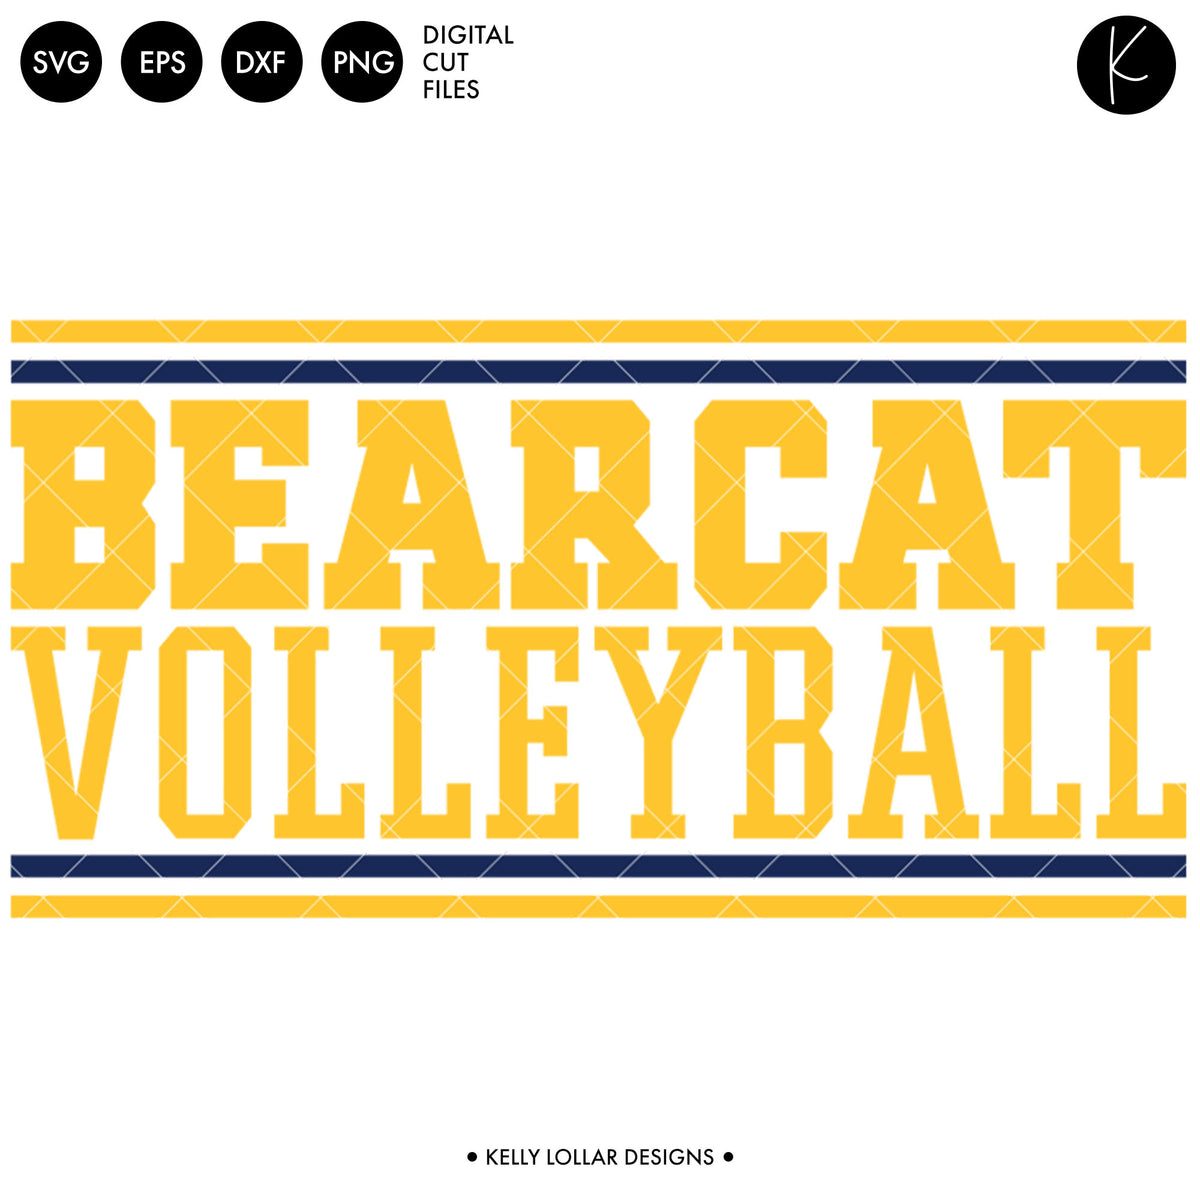 Bearcats Volleyball Bundle | SVG DXF EPS PNG Cut Files